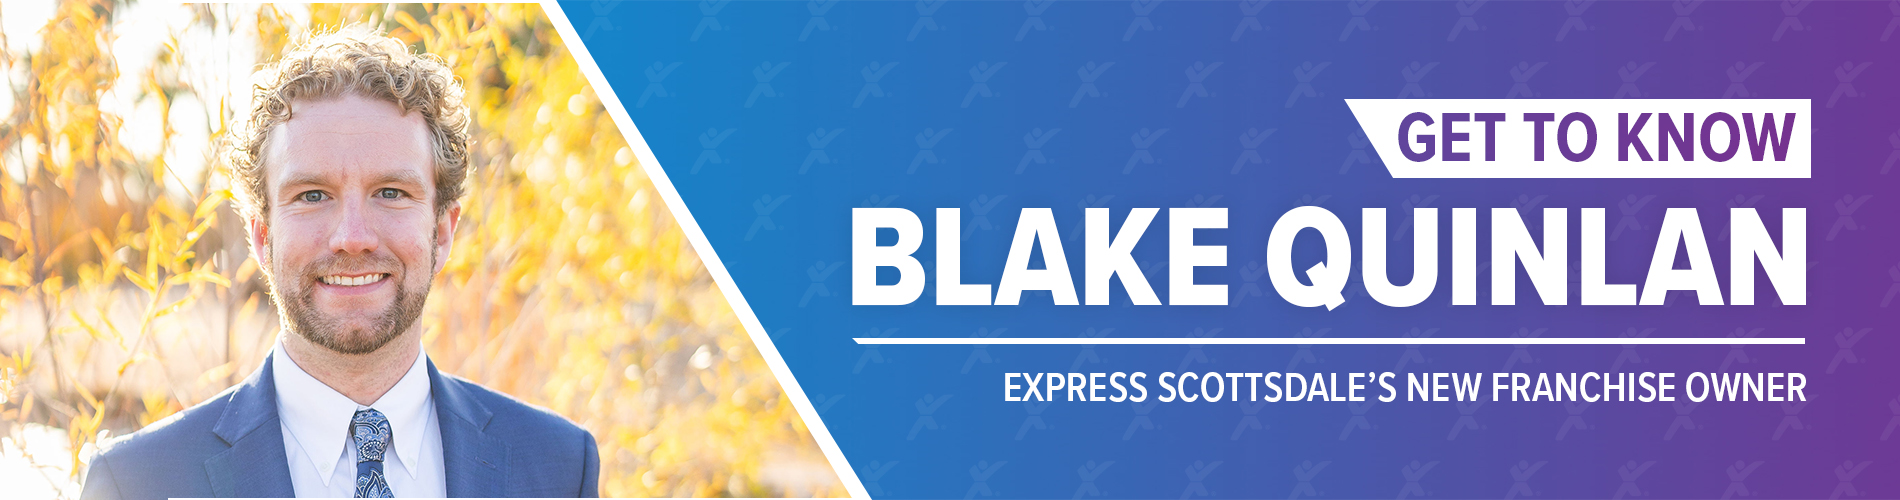 Get to Know Blake Quinlan, Our New Franchise Owner